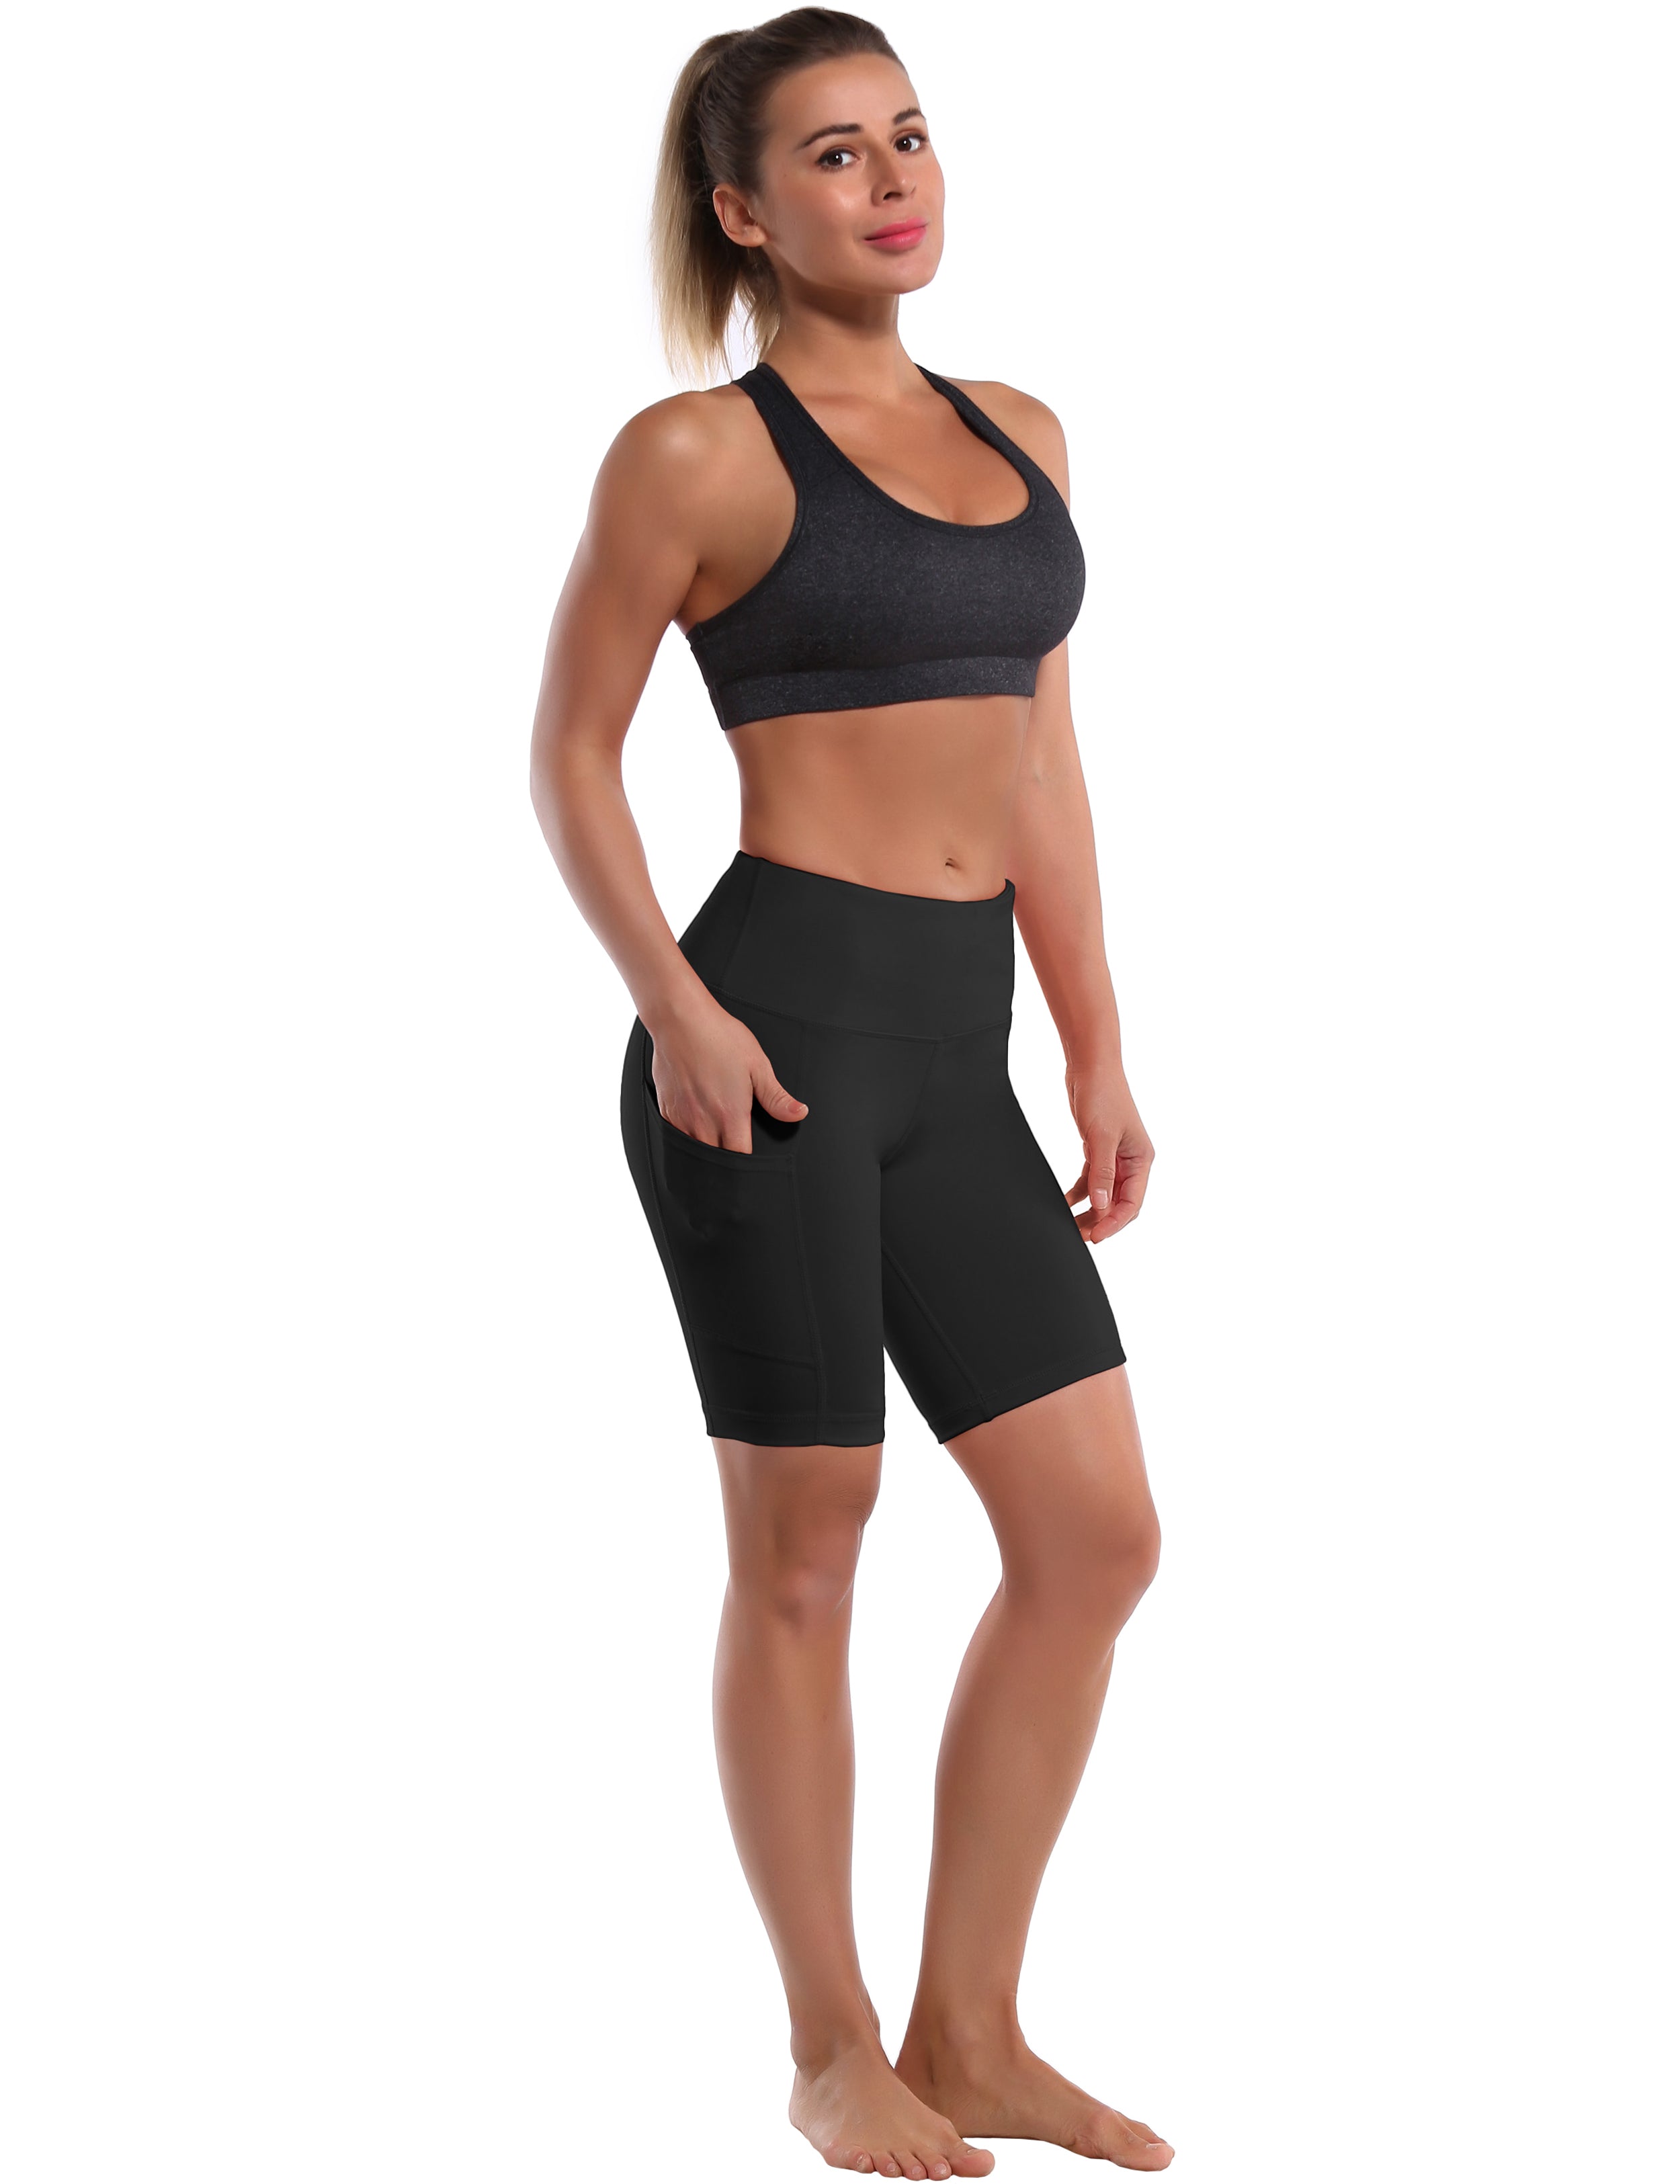 8" Side Pockets Biking Shorts black Sleek, soft, smooth and totally comfortable: our newest style is here. Softest-ever fabric High elasticity High density 4-way stretch Fabric doesn't attract lint easily No see-through Moisture-wicking Machine wash 75% Nylon, 25% Spandex